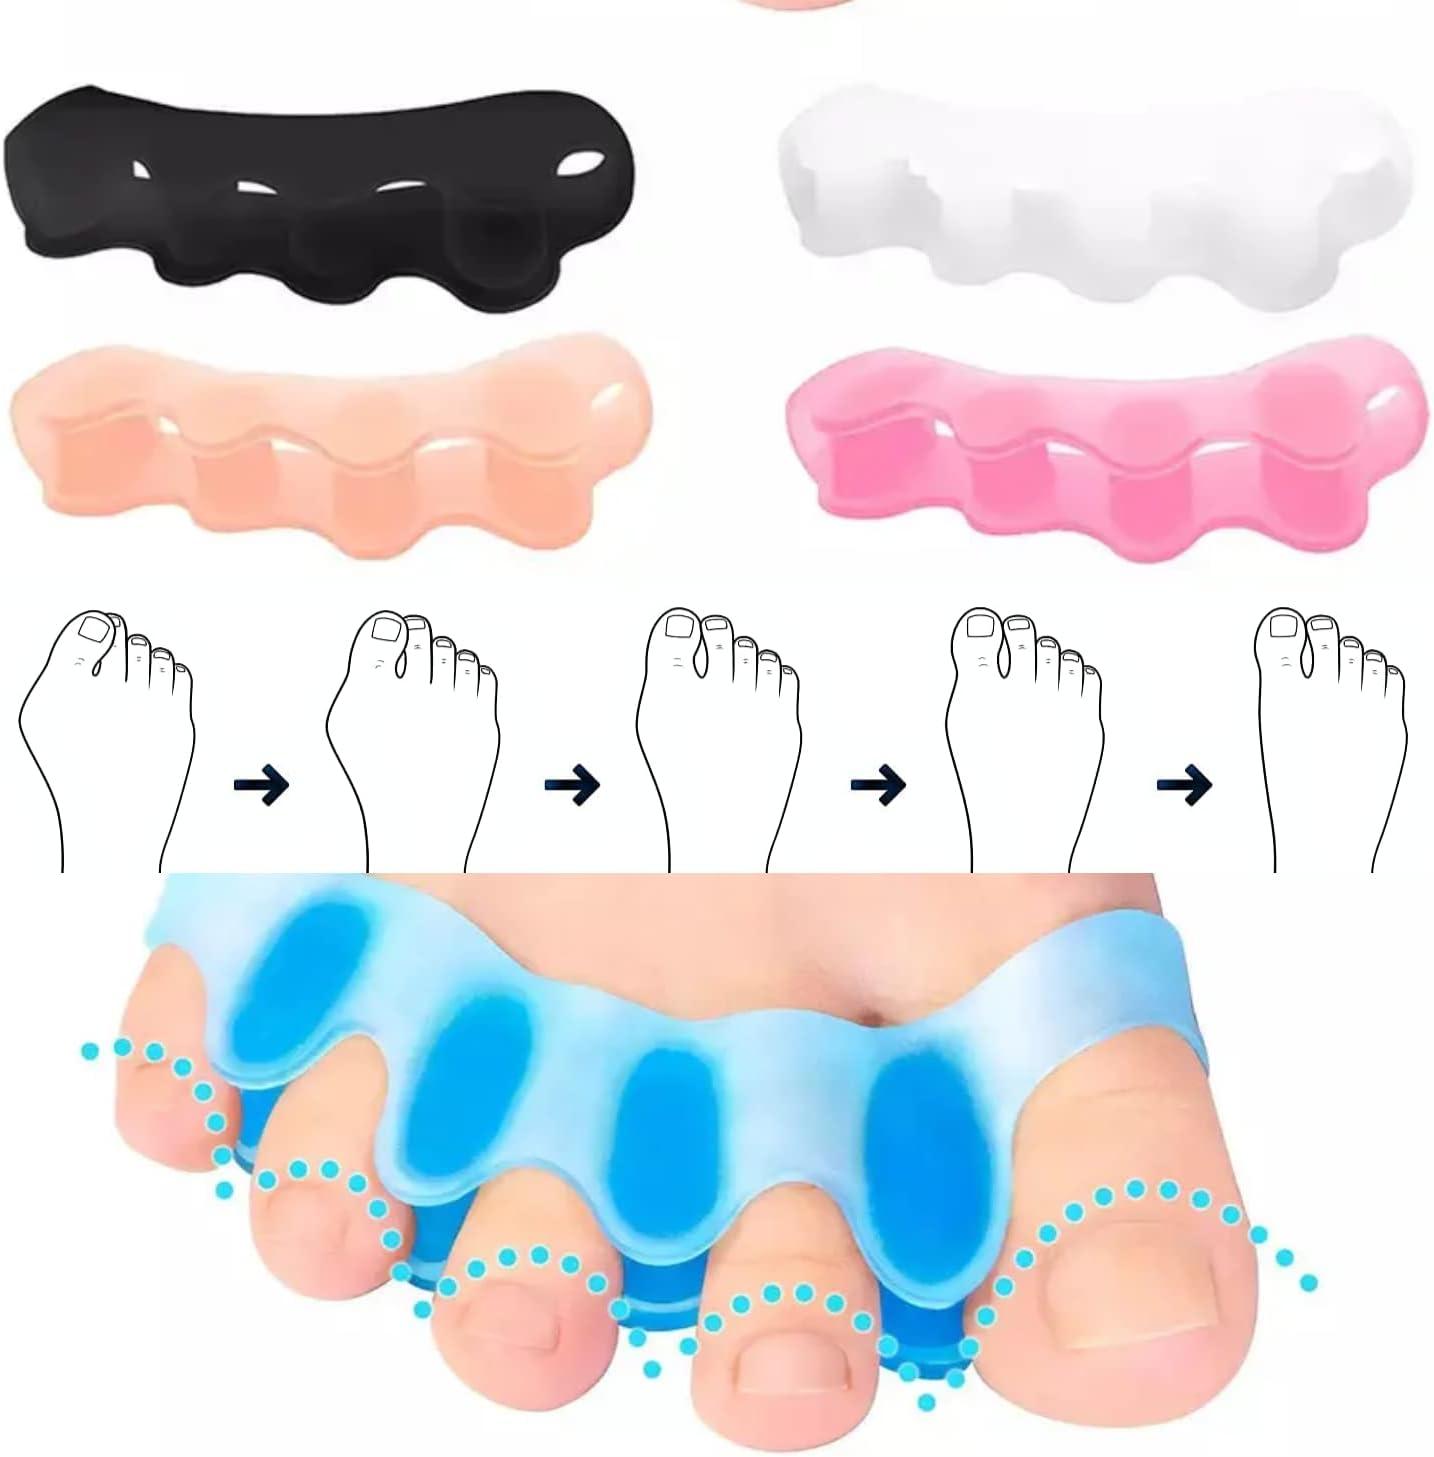 Toe Separators Spacers and Correctors for Men and Women - Bunion